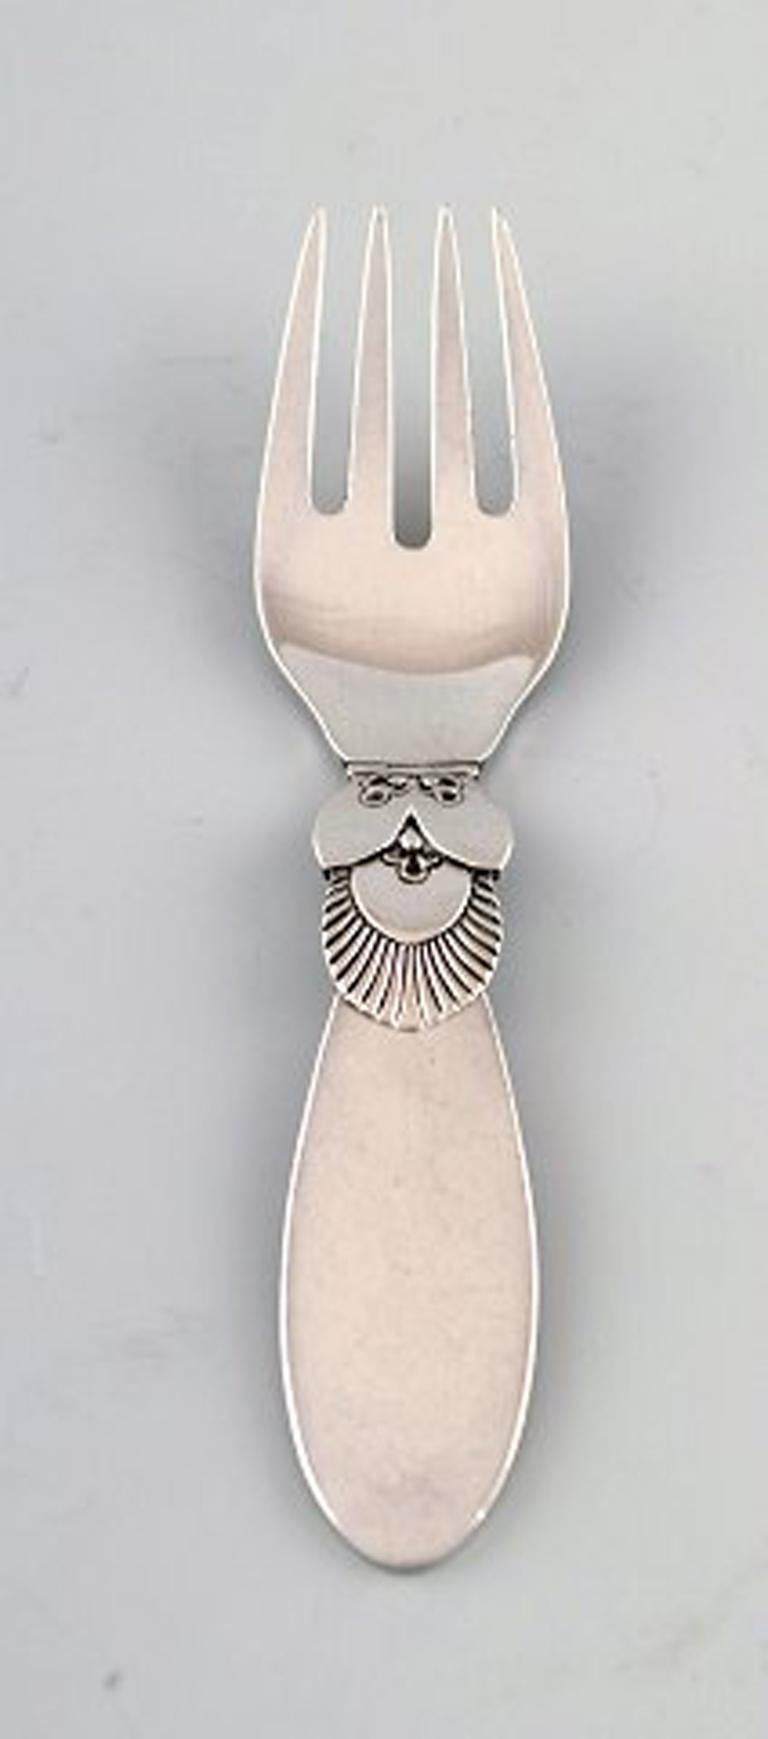 Georg Jensen sterling silver 'Cactus' cutlery. Child's set of spoon and fork.
Spoon measures 10.5 cm.
In very good condition.
Early stamp. 1933-1944.
Designed by Gundorph Albertus in 1930.